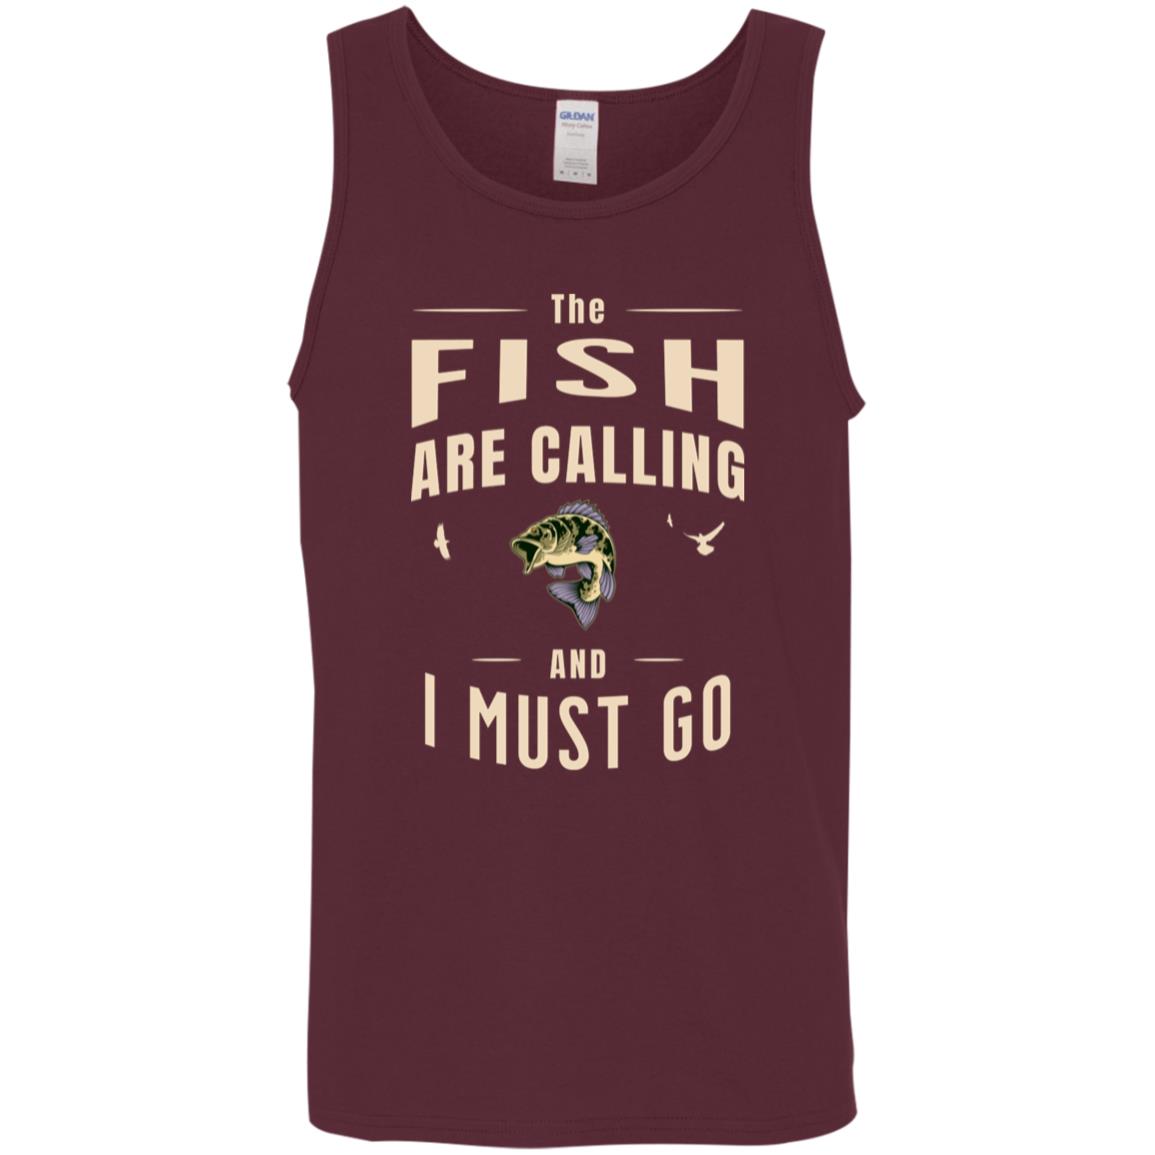 The fish are calling and I must go tank top k maroon